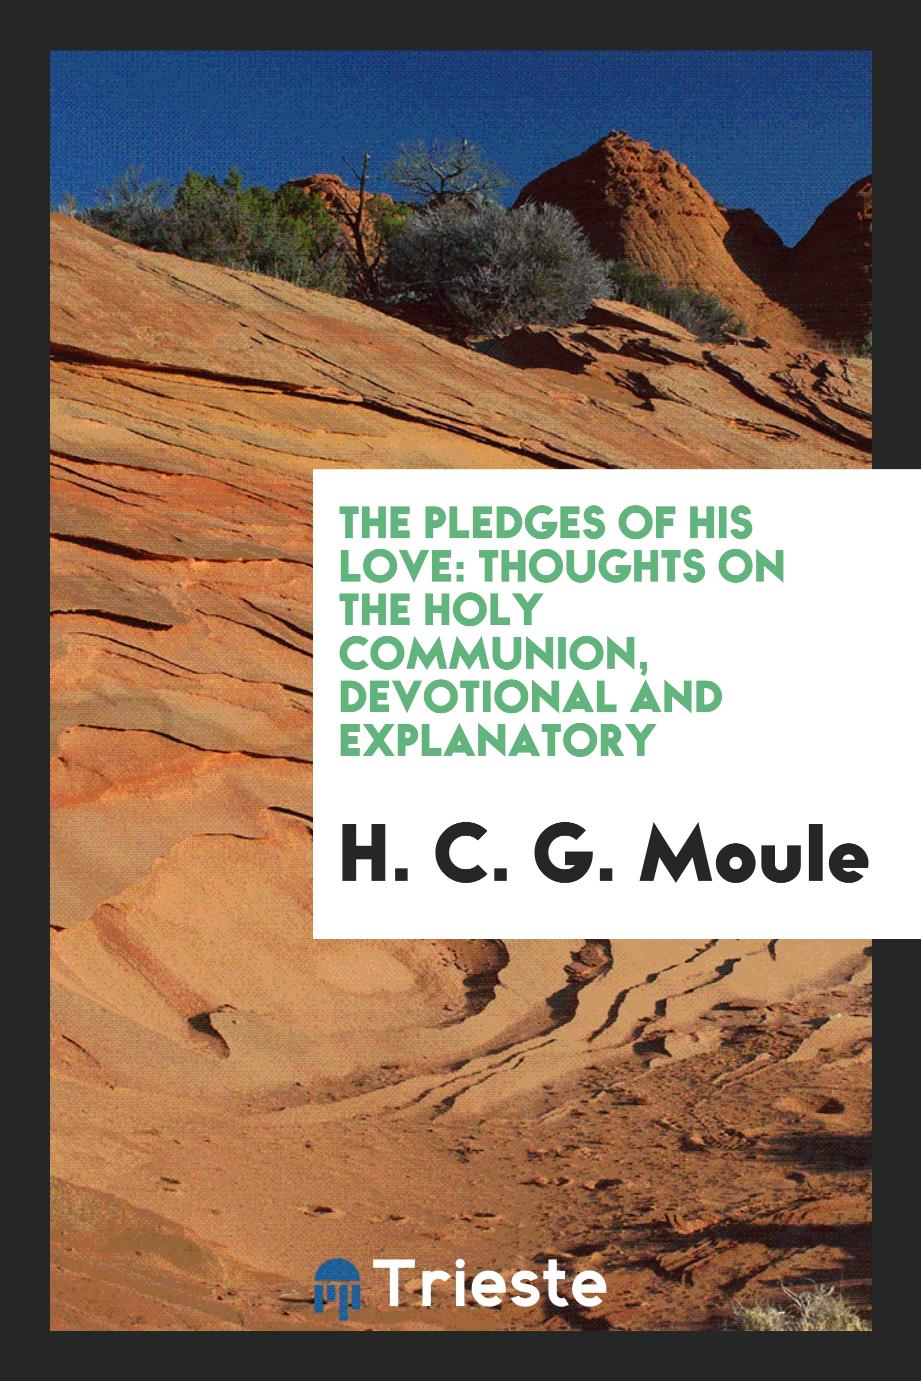 The pledges of his love: thoughts on the holy communion, devotional and explanatory